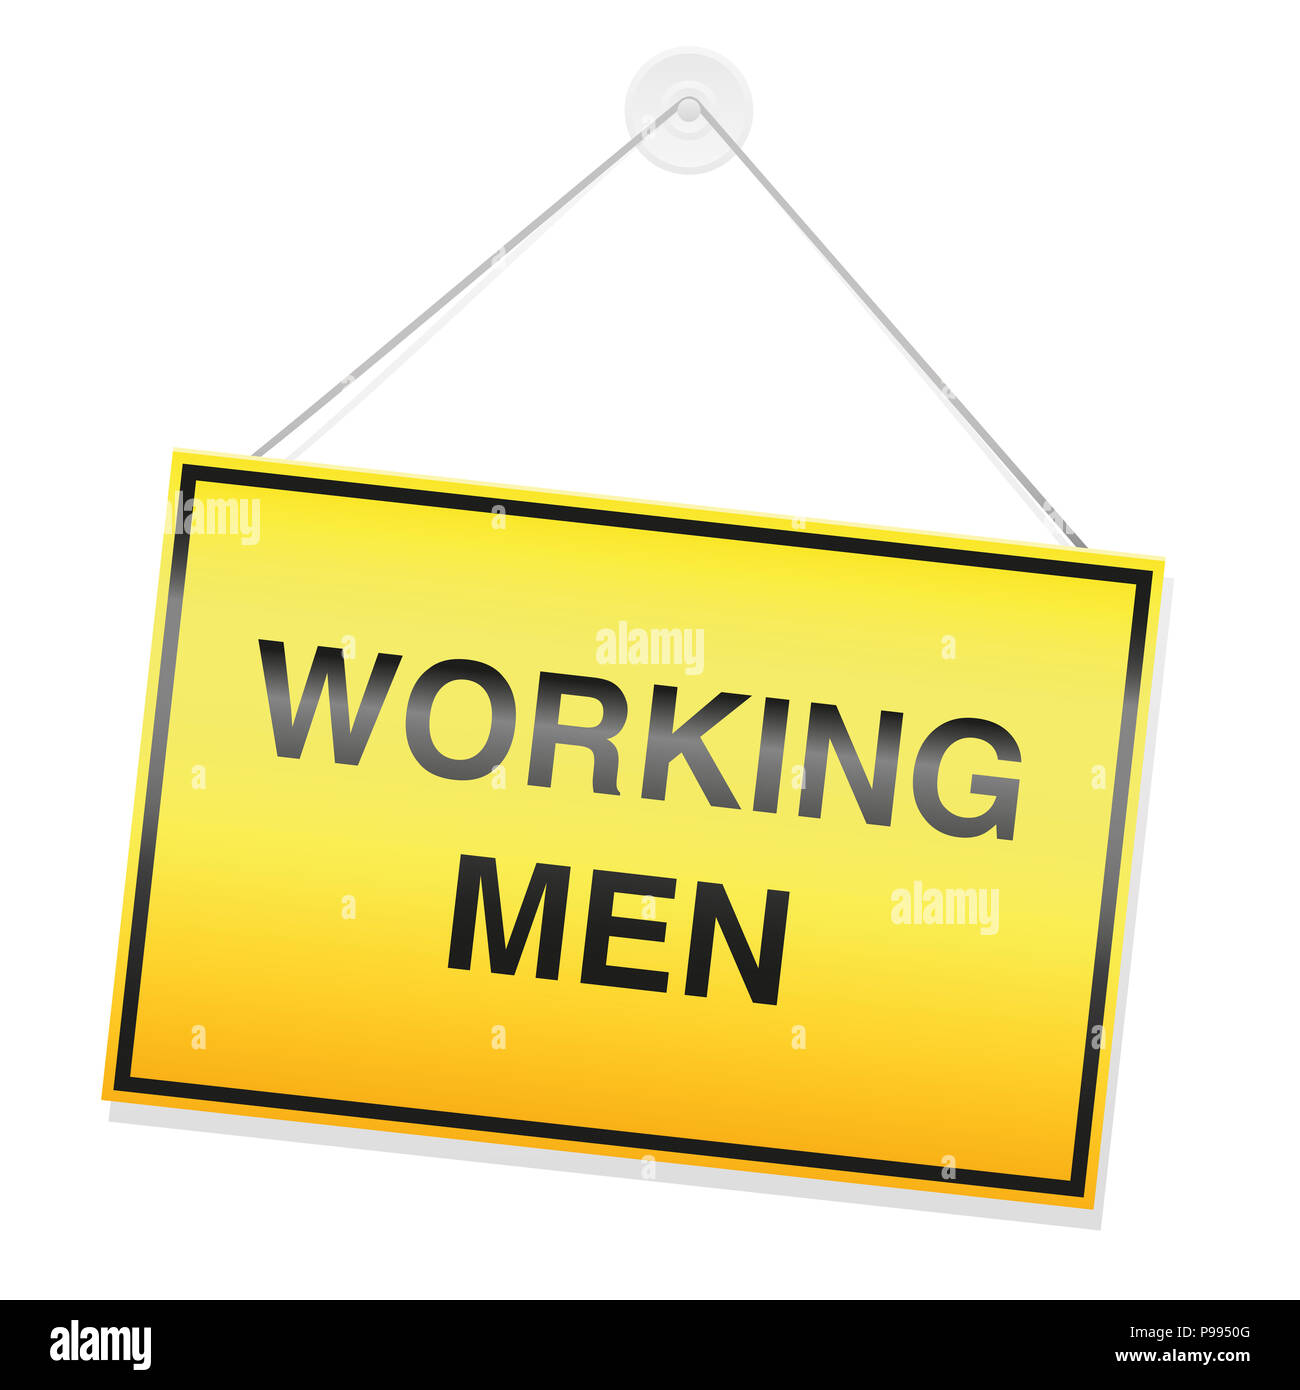 WORKING MEN, written on a yellow warning sign, metal plate - illustration on white background. Stock Photo